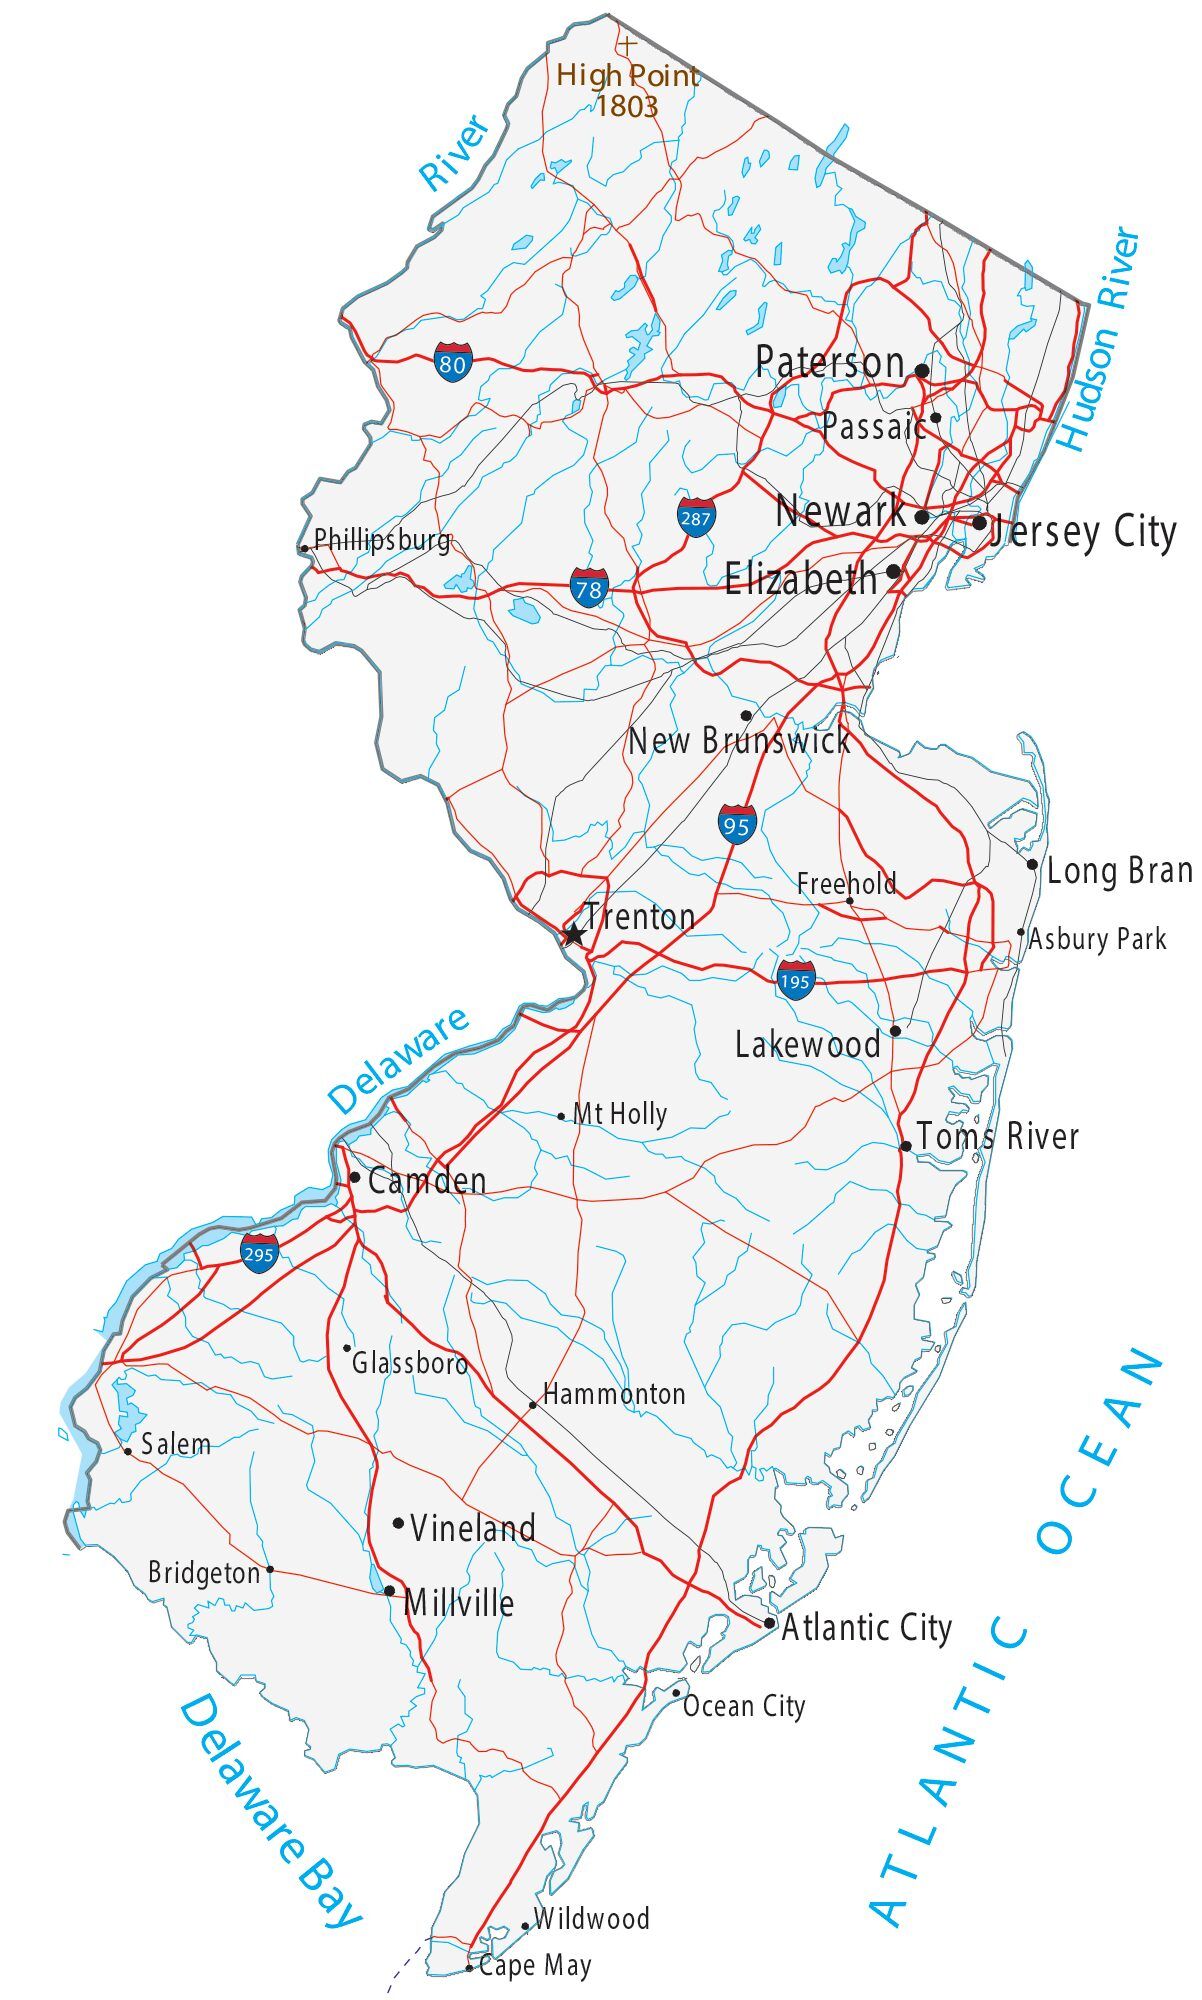 Map of New Jersey - Cities and Roads - GIS Geography